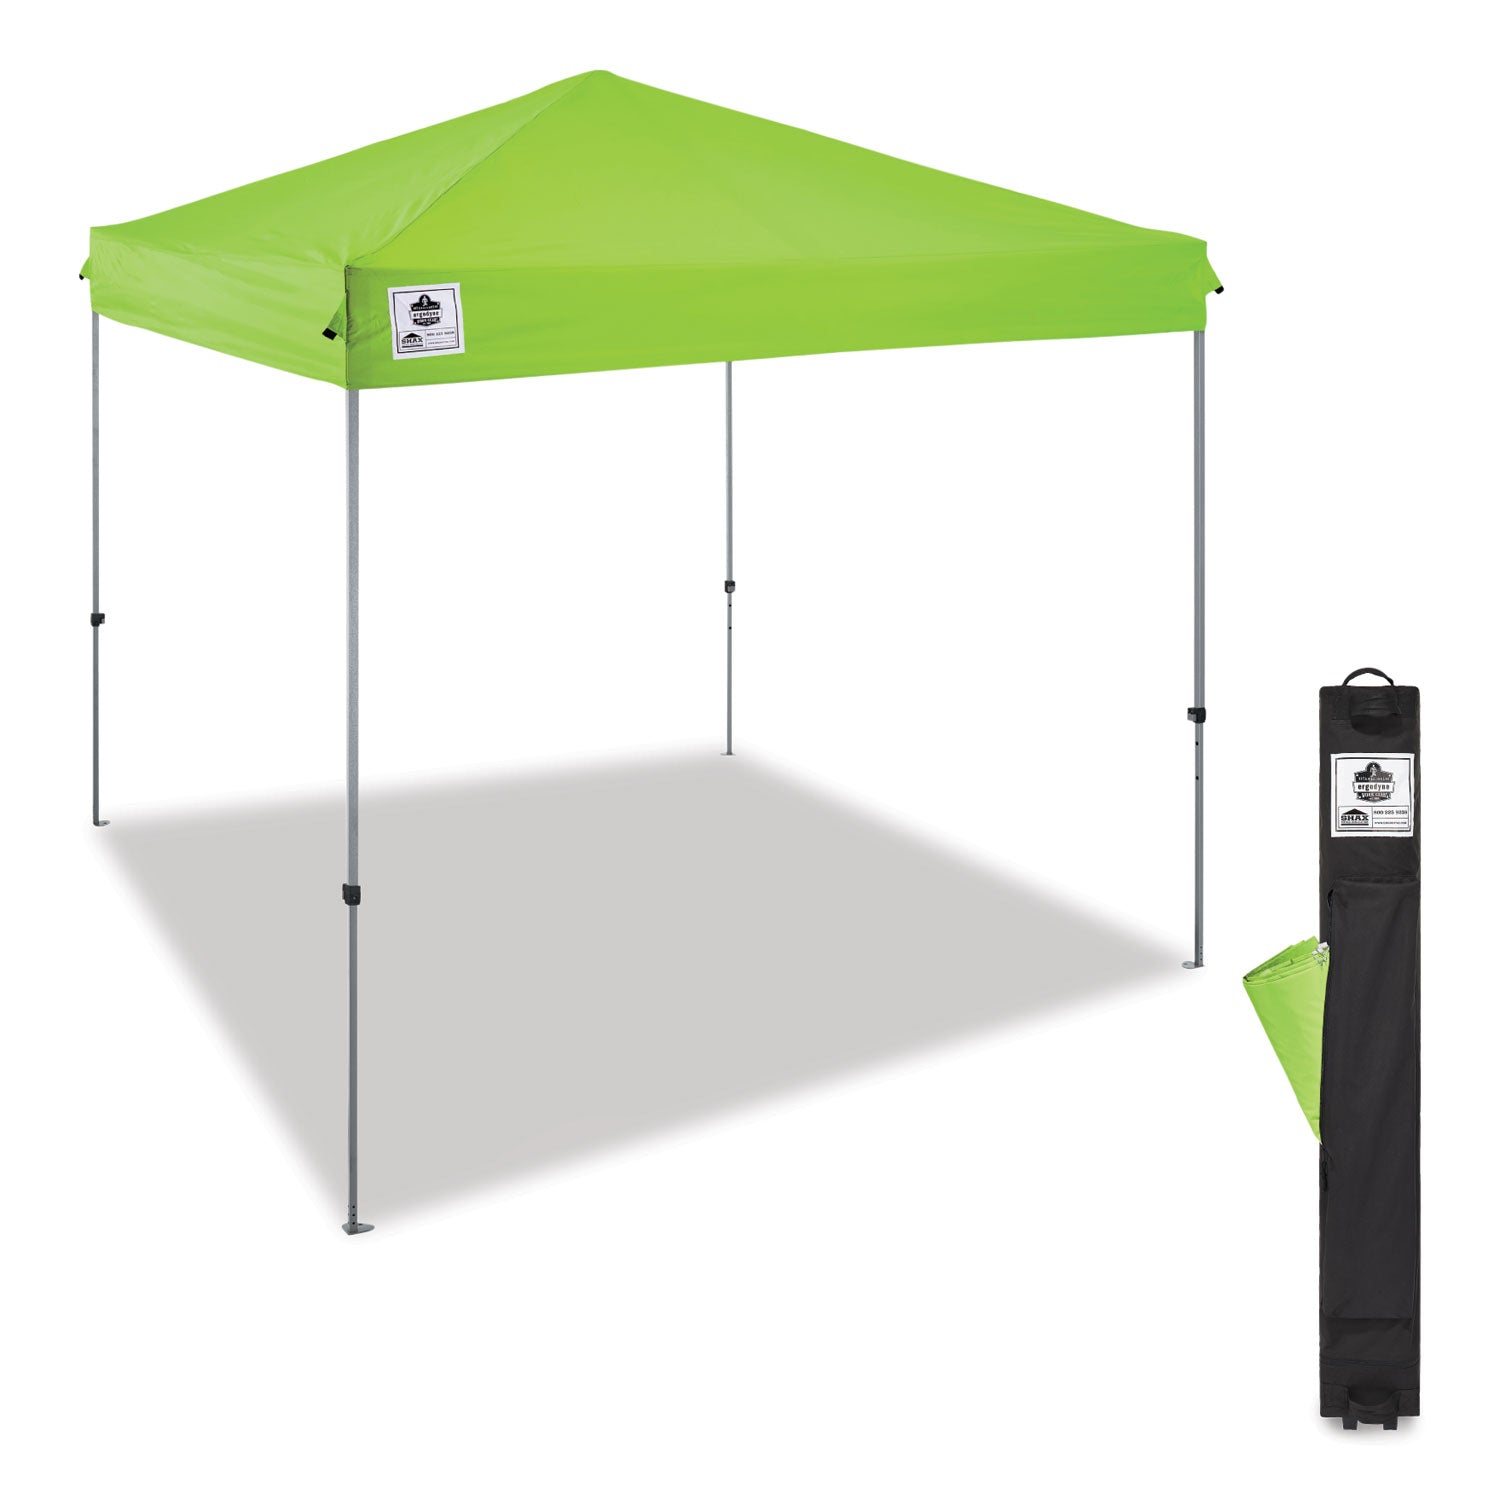 shax-6010-lightweight-pop-up-tent-single-skin-10-ft-x-10-ft-polyester-steel-lime-ships-in-1-3-business-days_ego12910 - 1